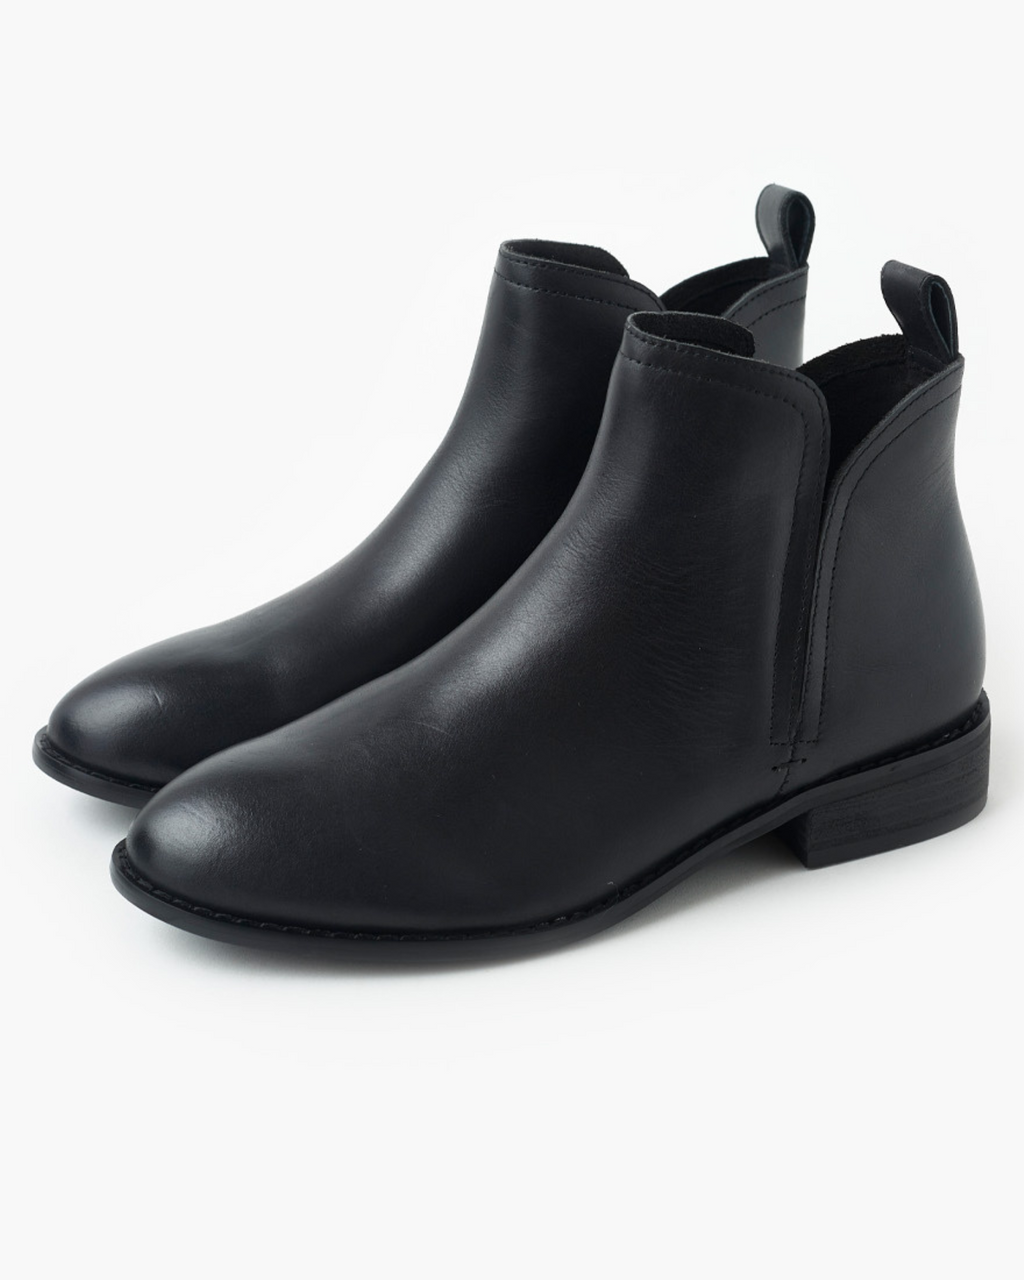 Boots | Buy Womens Boots Online | Walnut Melbourne